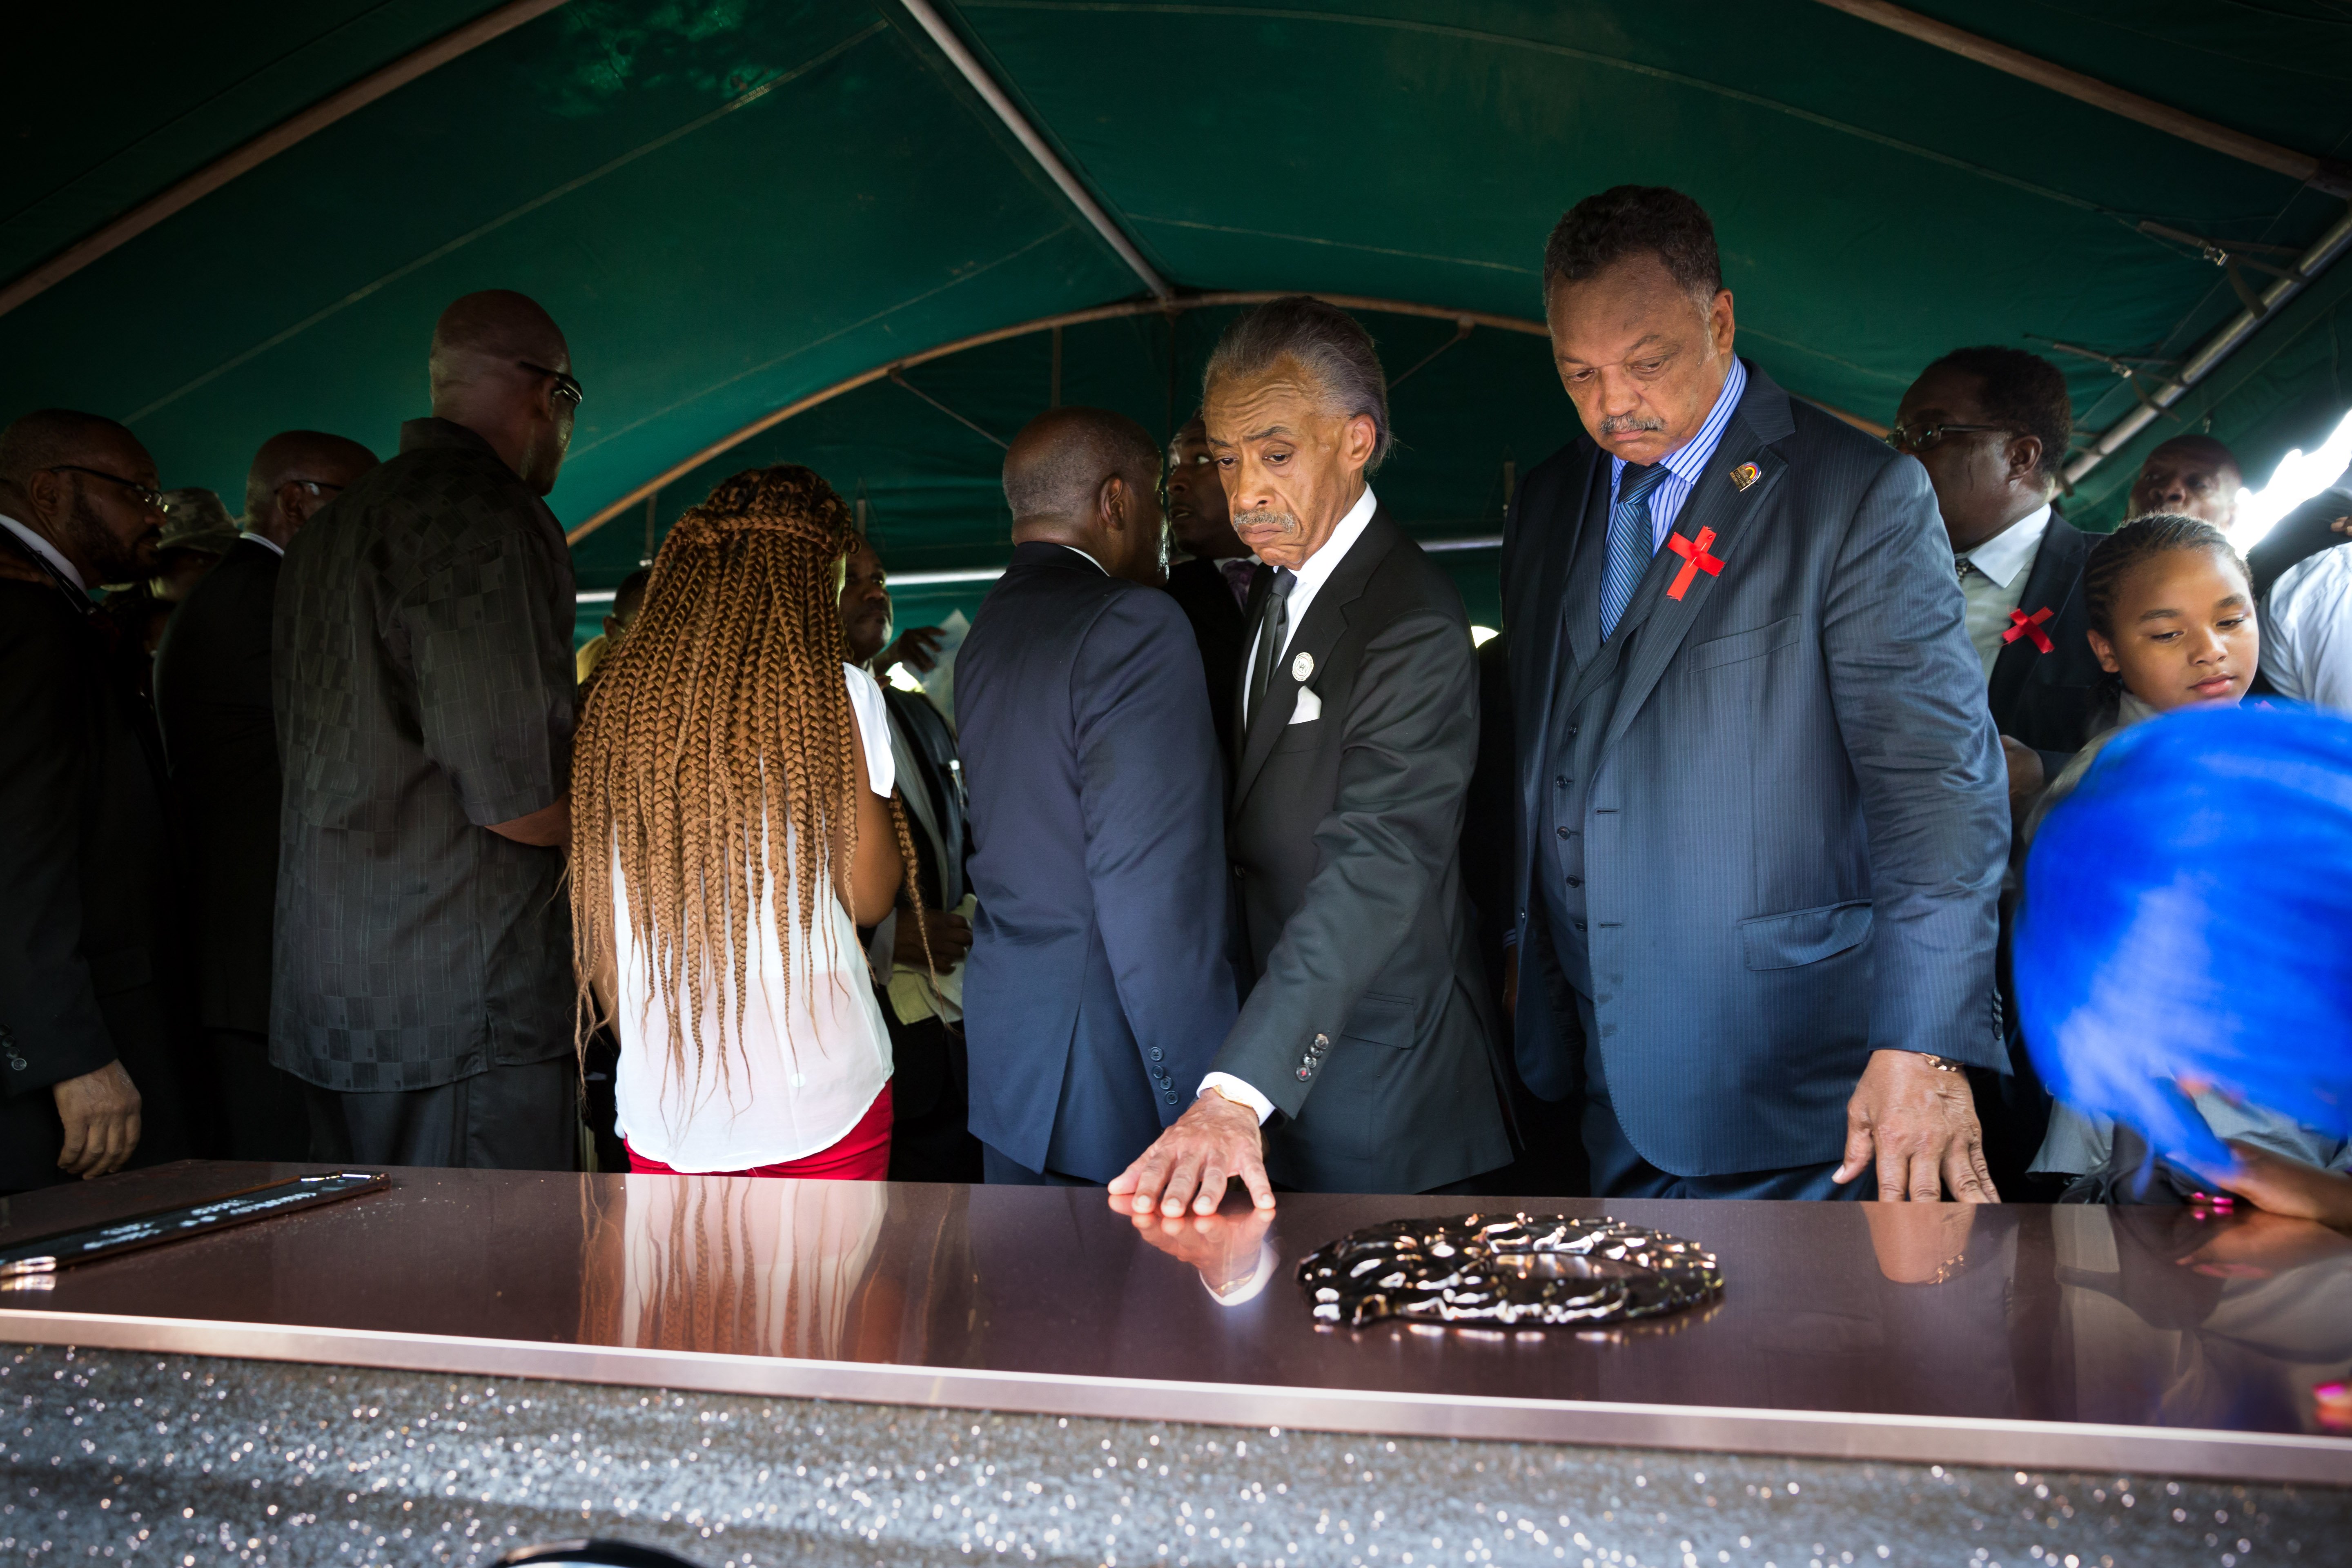 Rev. Al Sharpton and Jessie Jackson touch the casket during the funeral for Michael Brown at St. Peters Cemetery in St. Louis on Aug. 25, 2014.